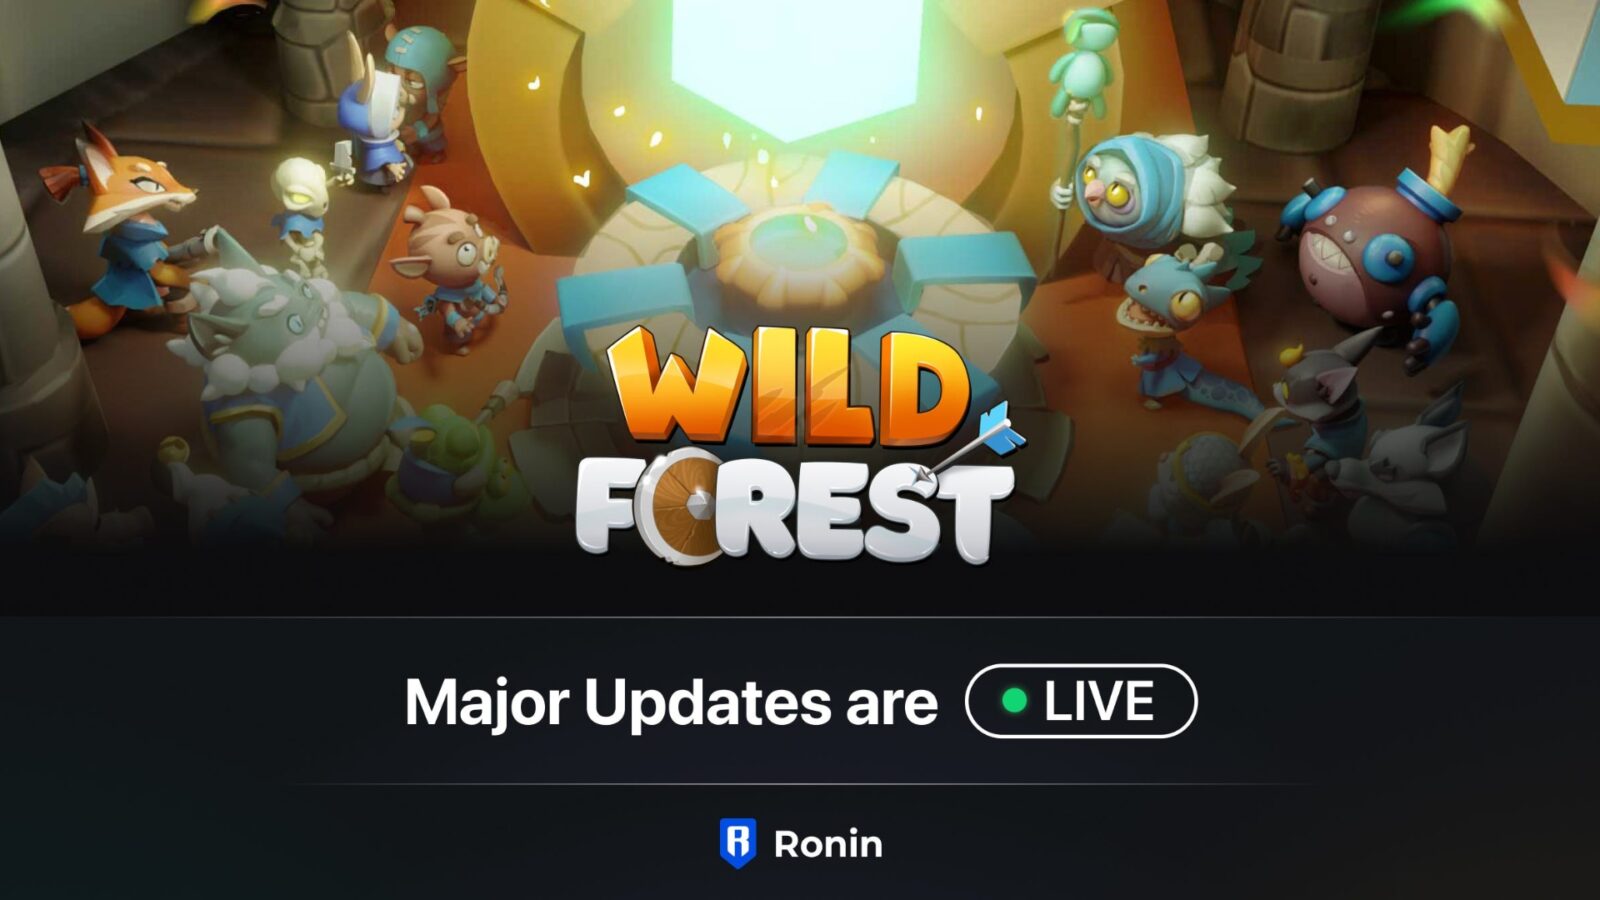 Web3 RTS Game Wild Forest Releases Exciting Updates